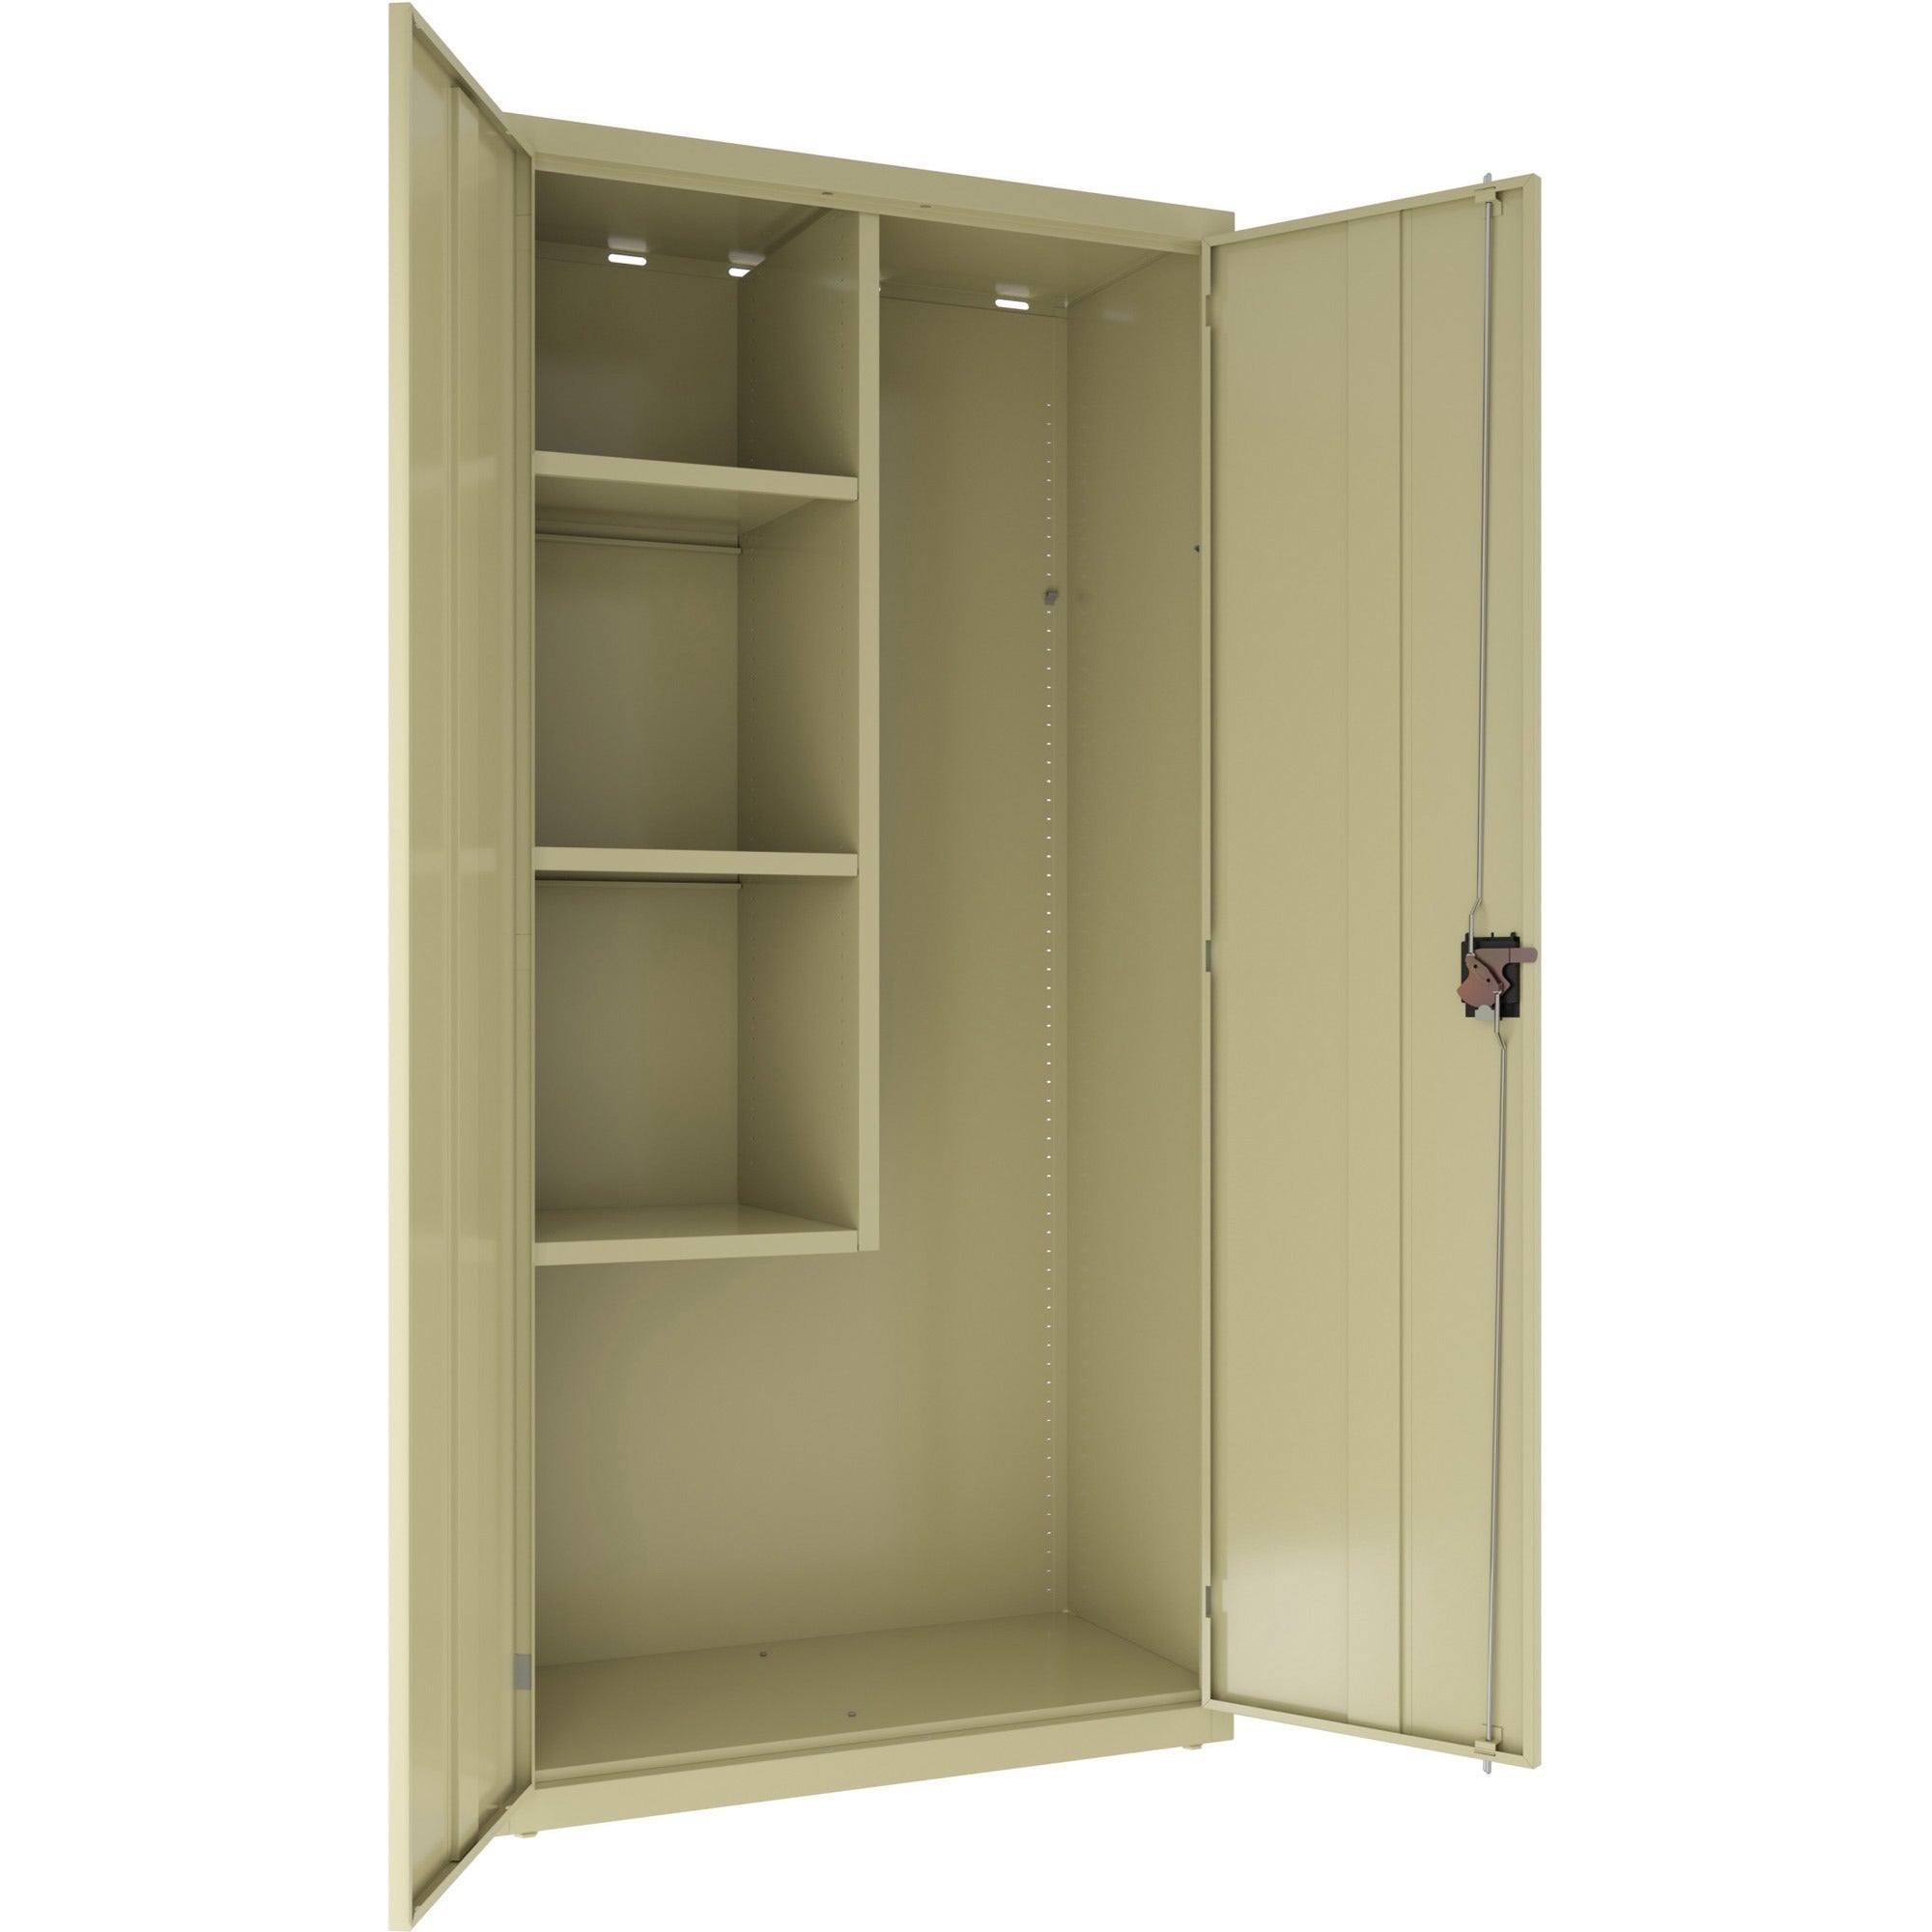 lorell-fortress-series-janitorial-cabinet-36-x-18-x-72-4-x-shelfves-hinged-doors-locking-system-welded-sturdy-recessed-locking-handle-durable-powder-coat-finish-storage-space-adjustable-shelf-putty-steel-recycled_llr00017 - 3